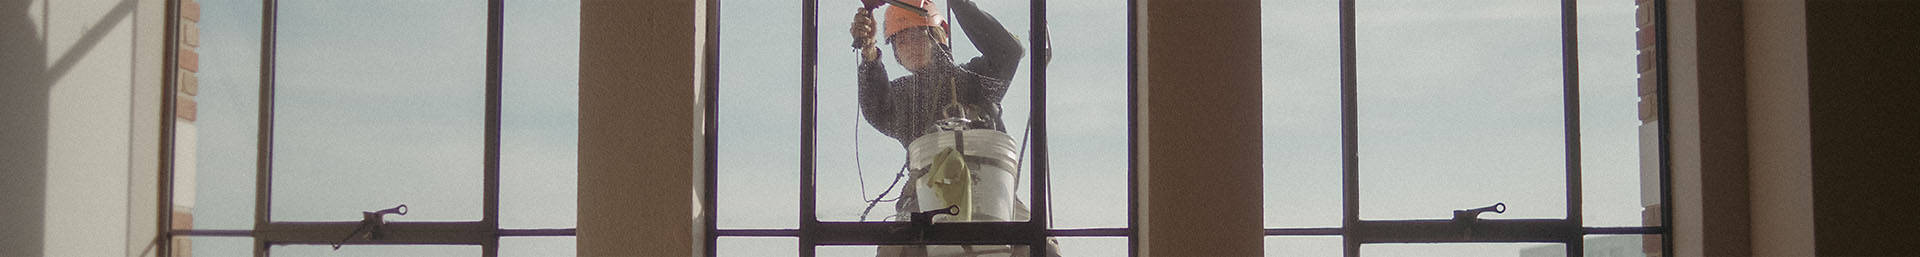 Image of a woman harnessed in the air, washing a window in boots and a hard had, with the image taken from inside the building so she's seen from the front.